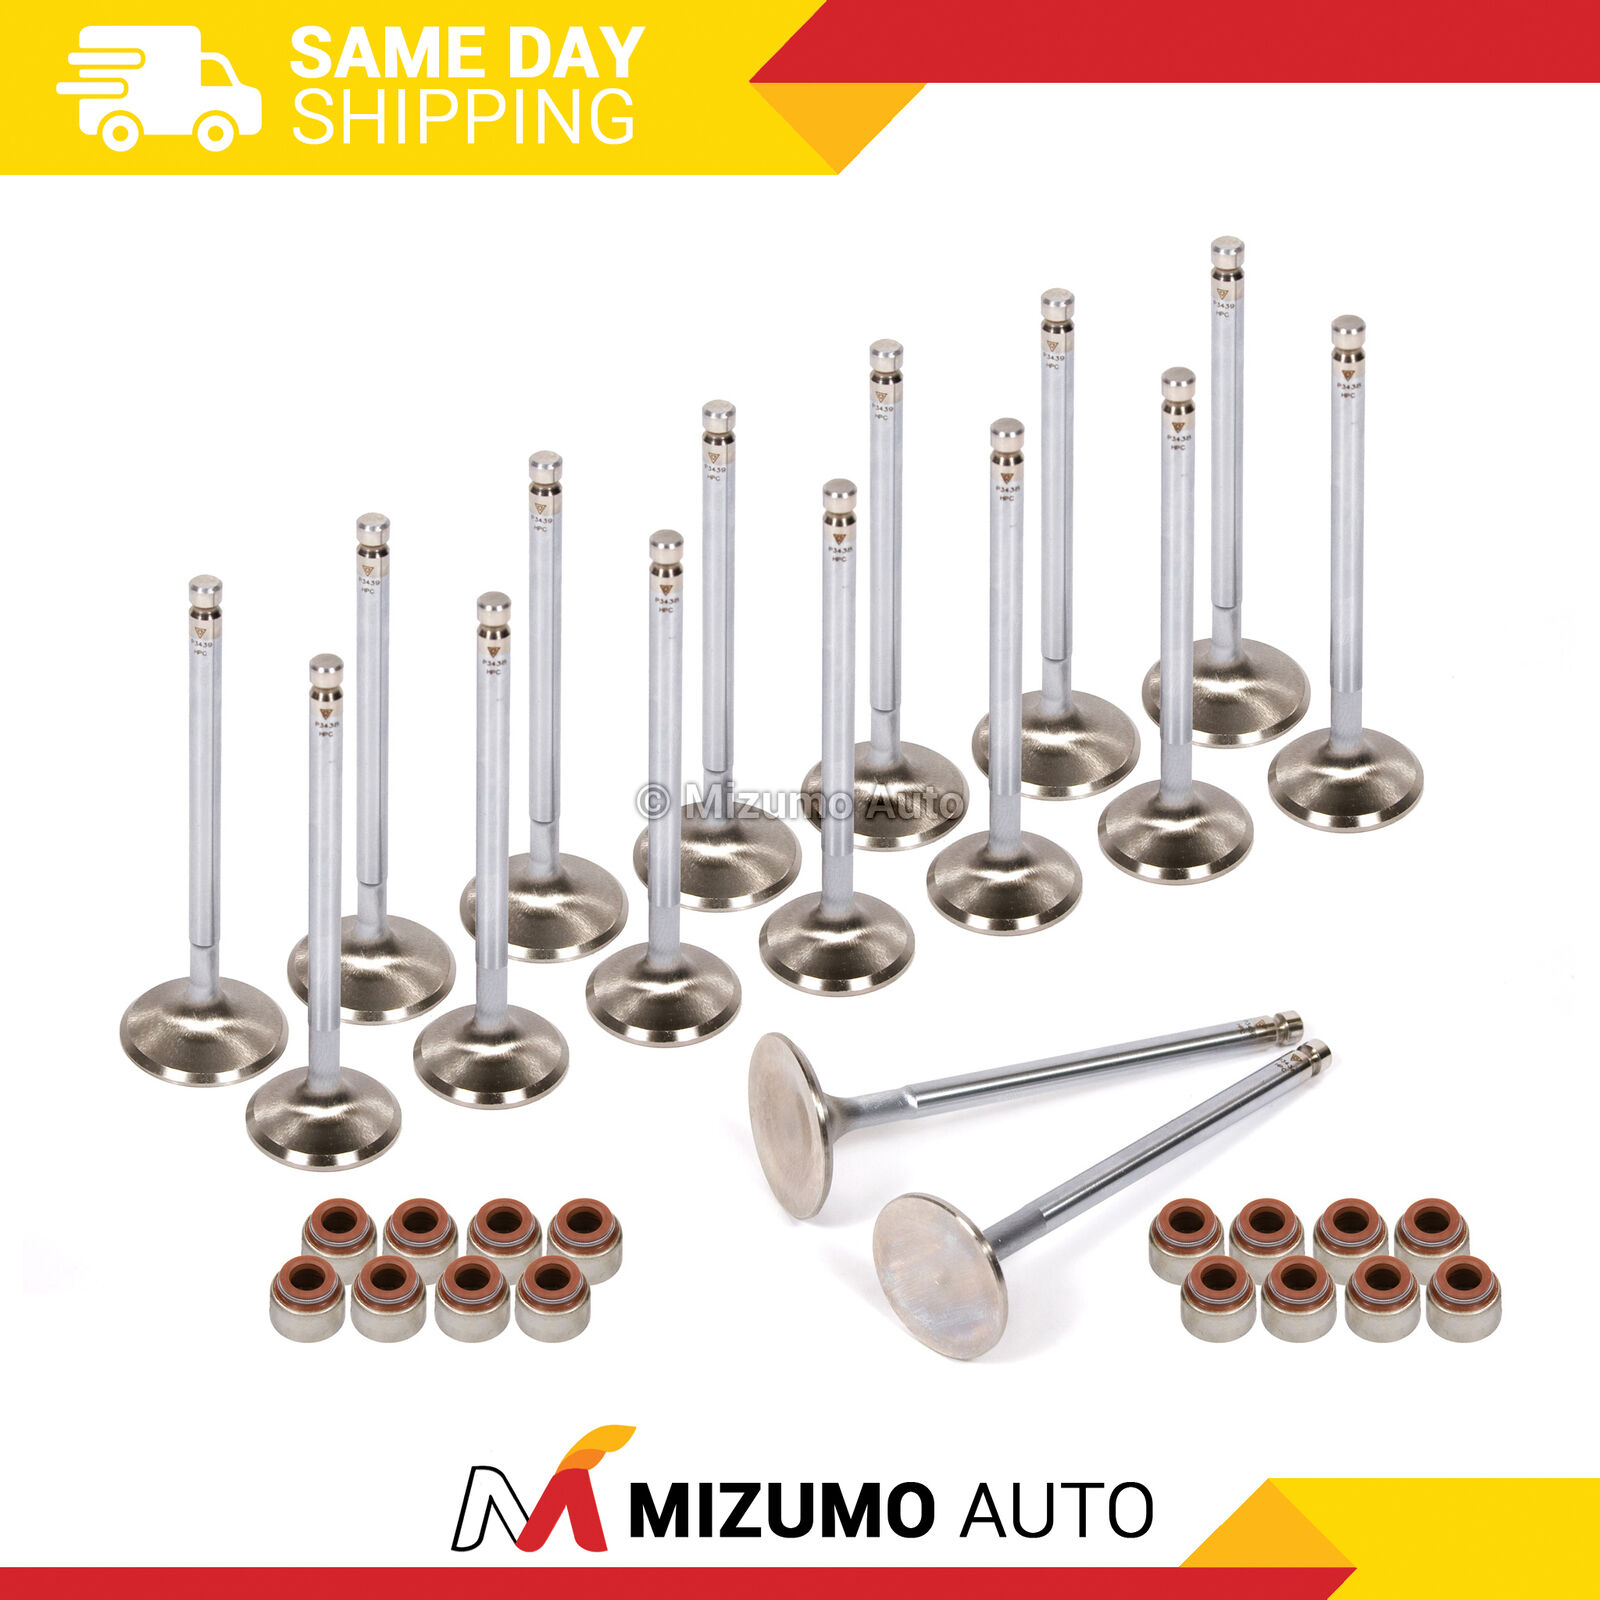 High Performance Intake Exhaust Valves w/ Seals Fit 89-06 Eagle Mitsubishi 4G63